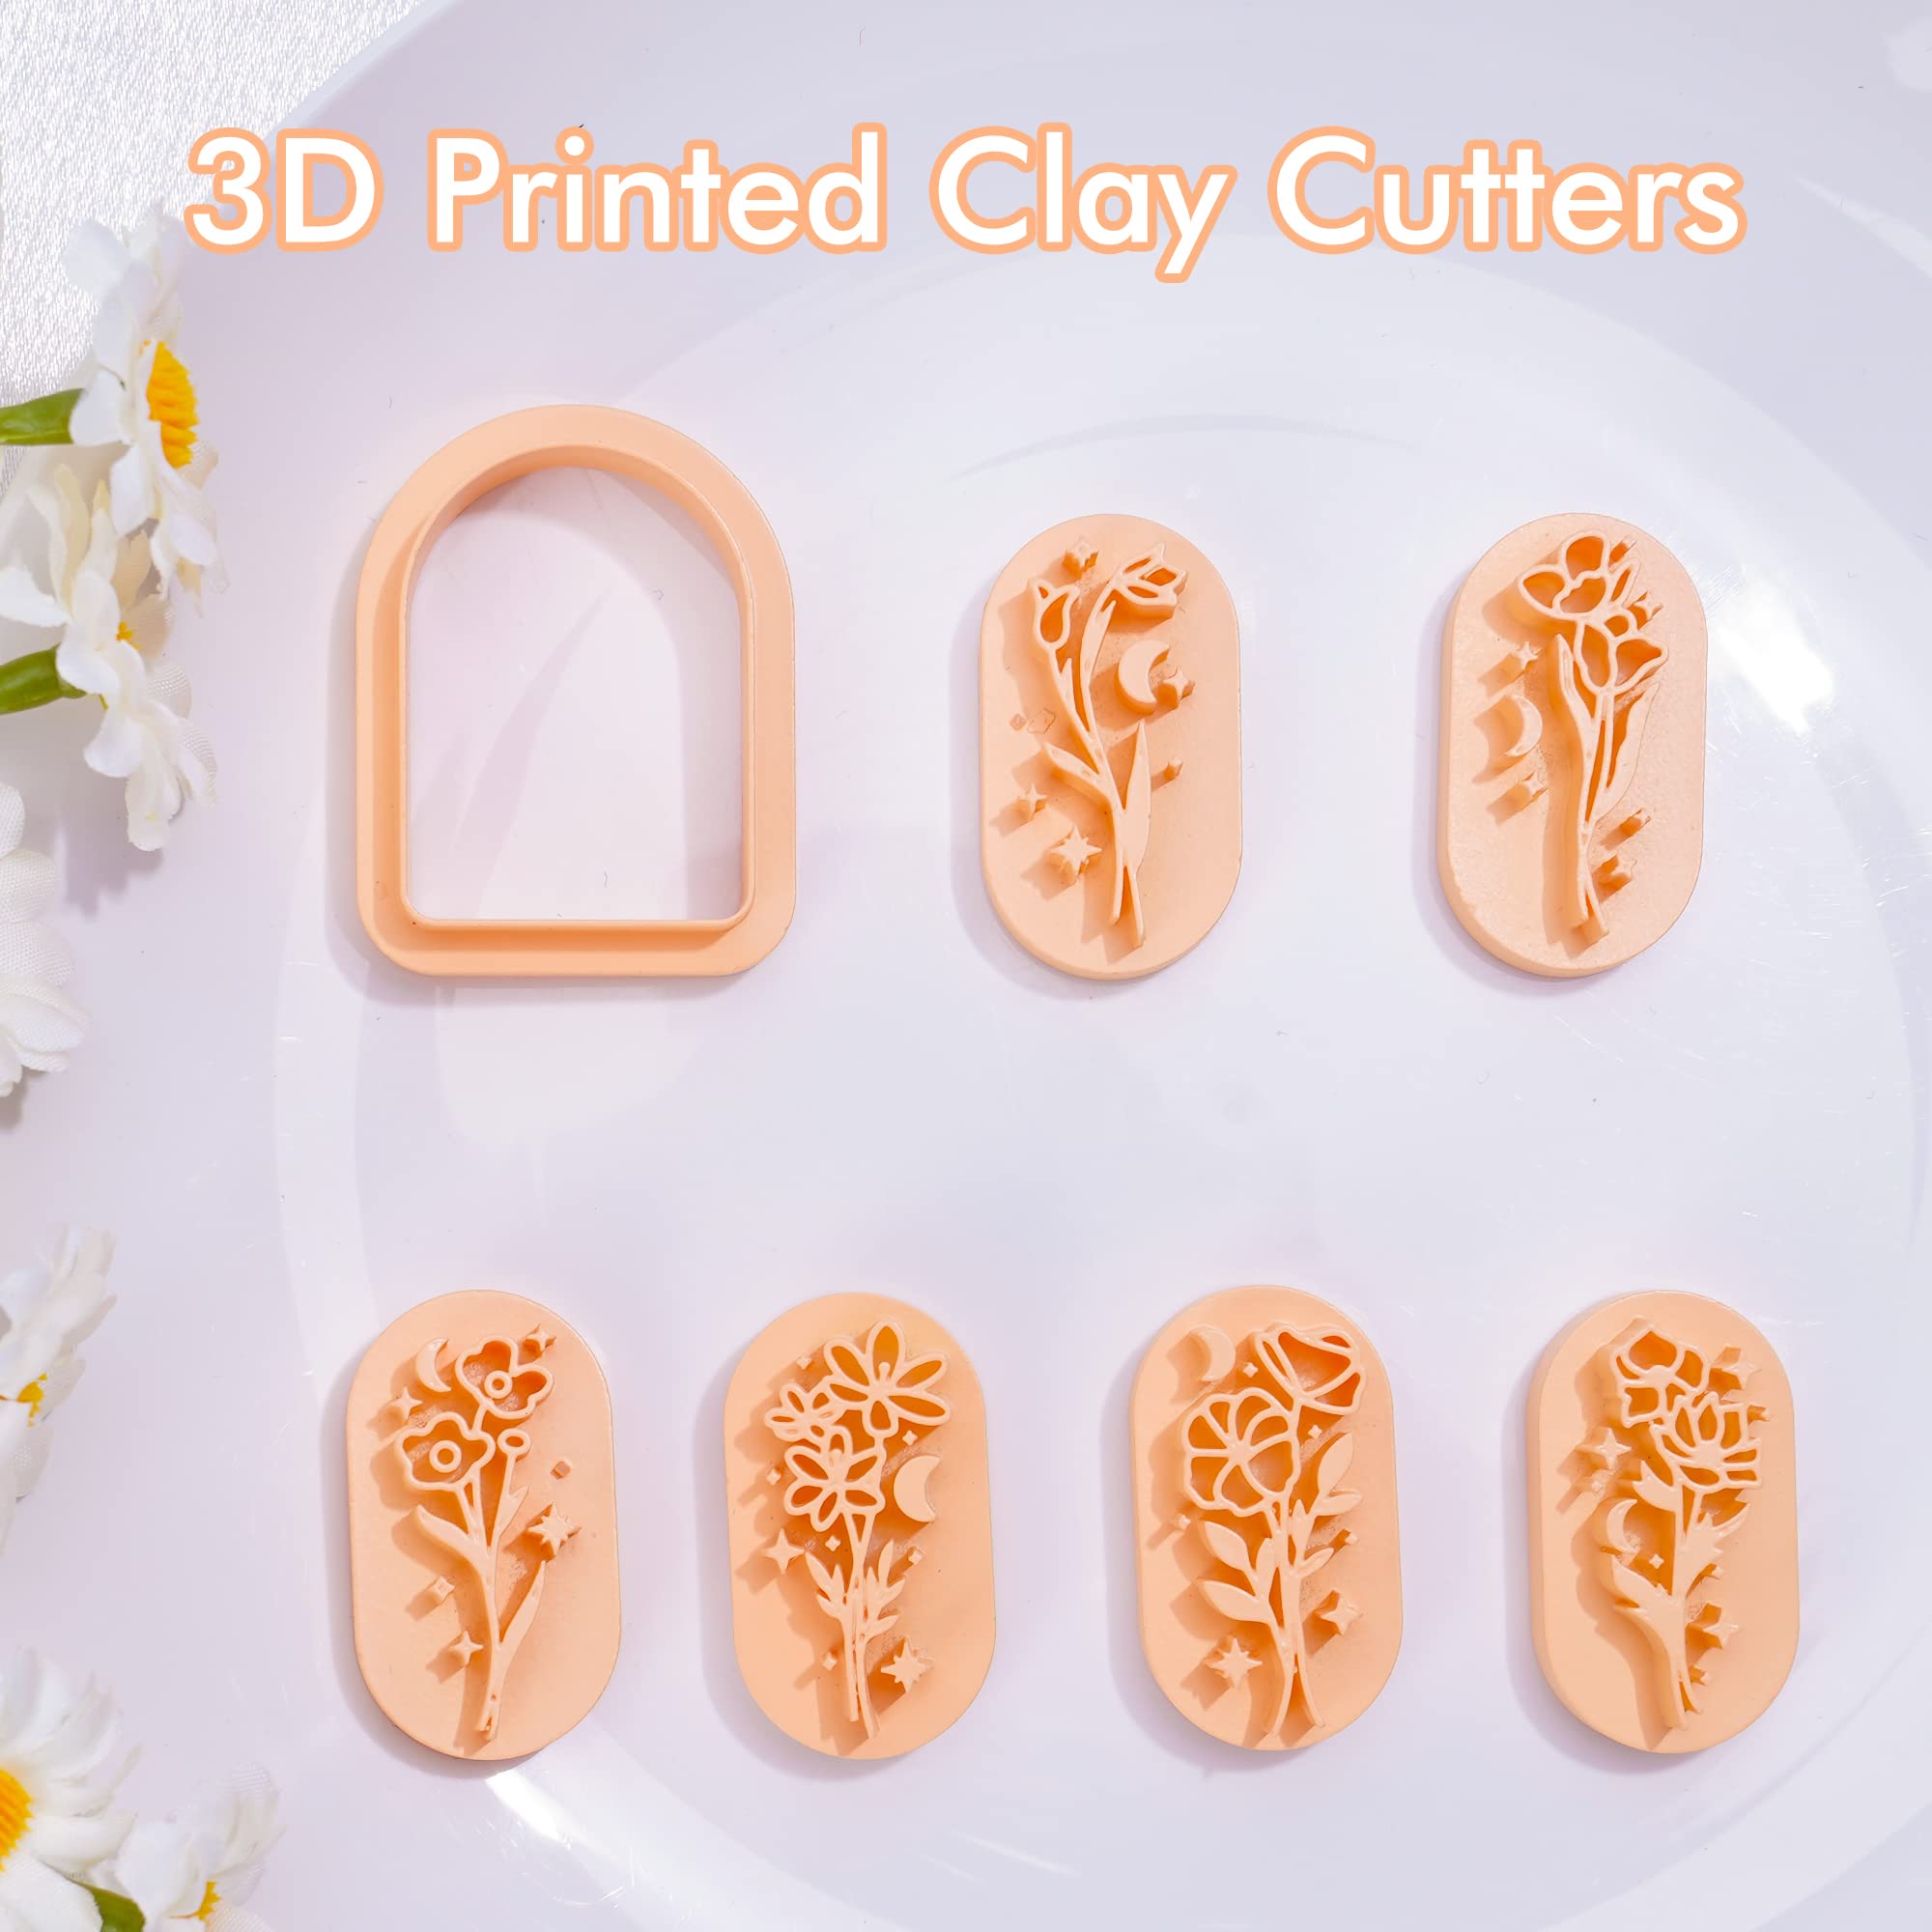 Puocaon Starry Flower Clay Cutters 6 Shapes Bouquet Stamps